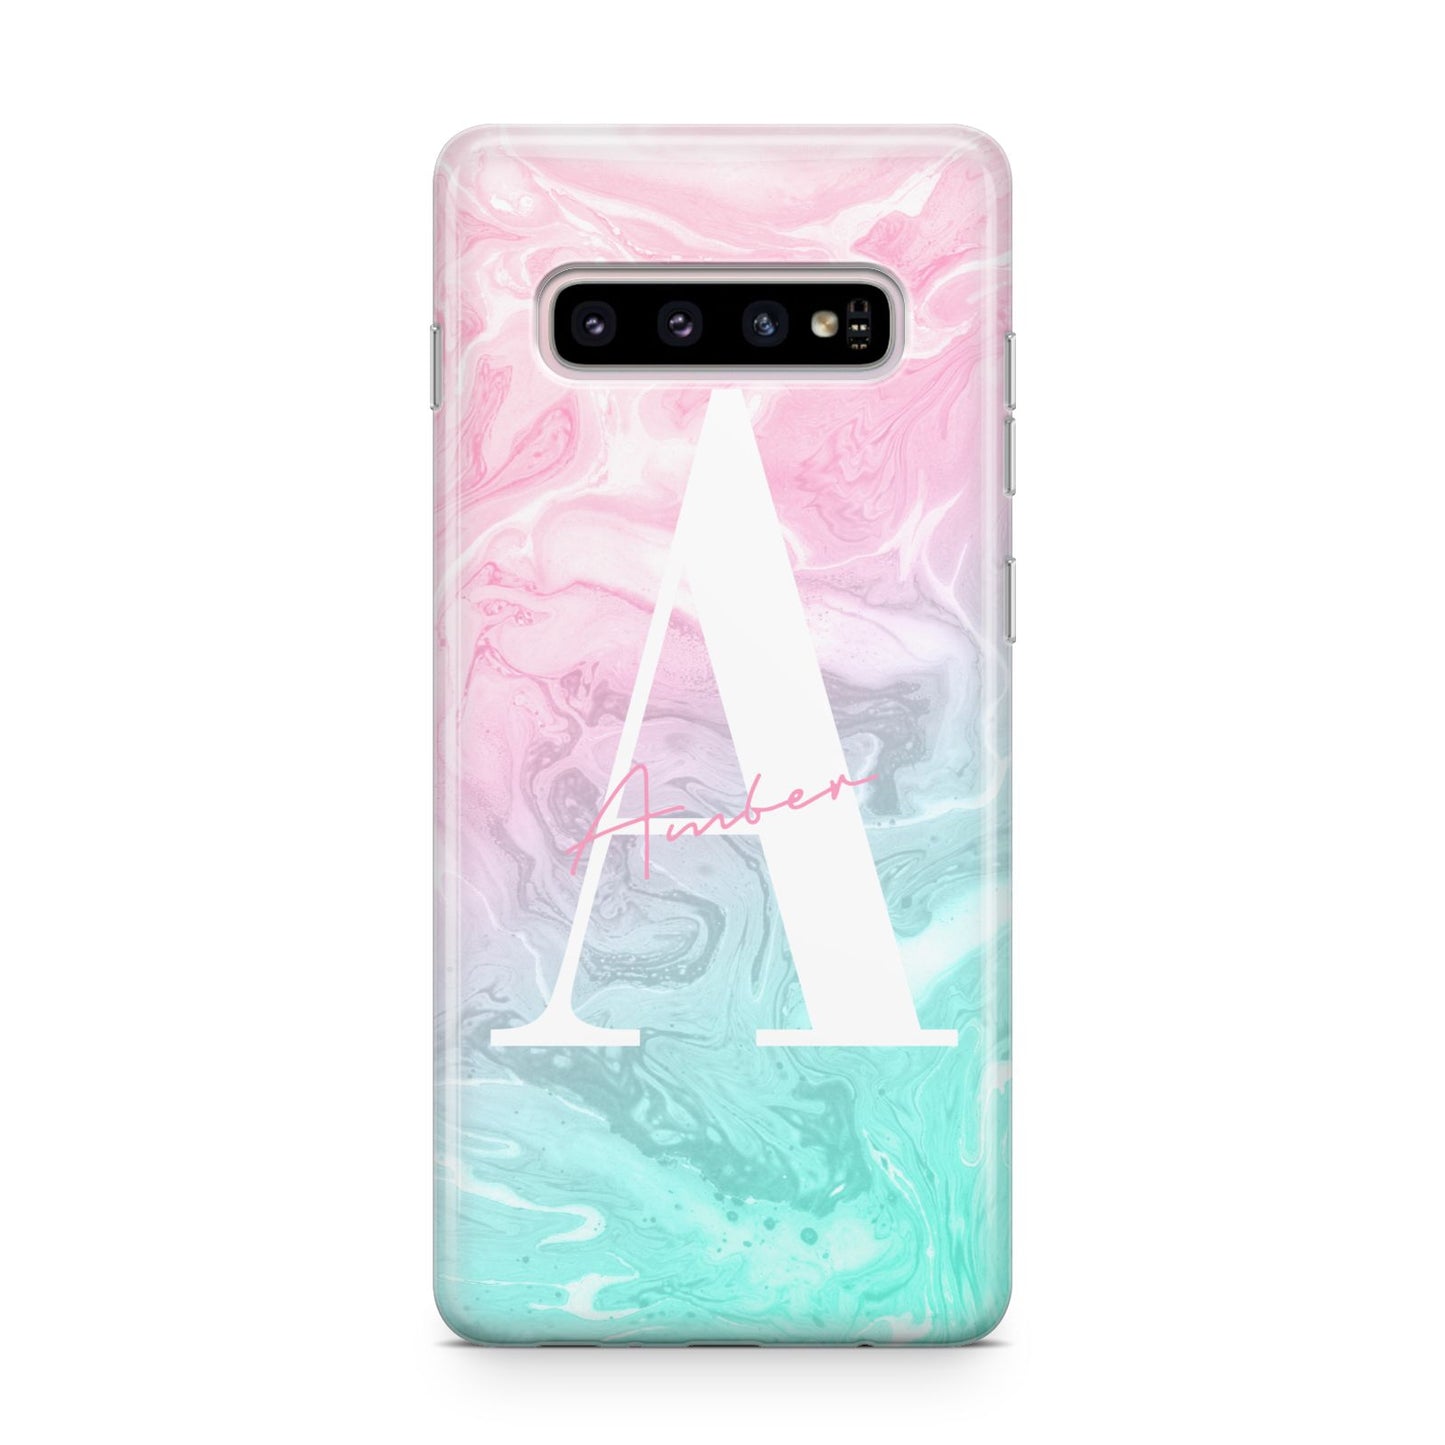 Monogrammed Pink Turquoise Pastel Marble Samsung Galaxy S10 Plus Case